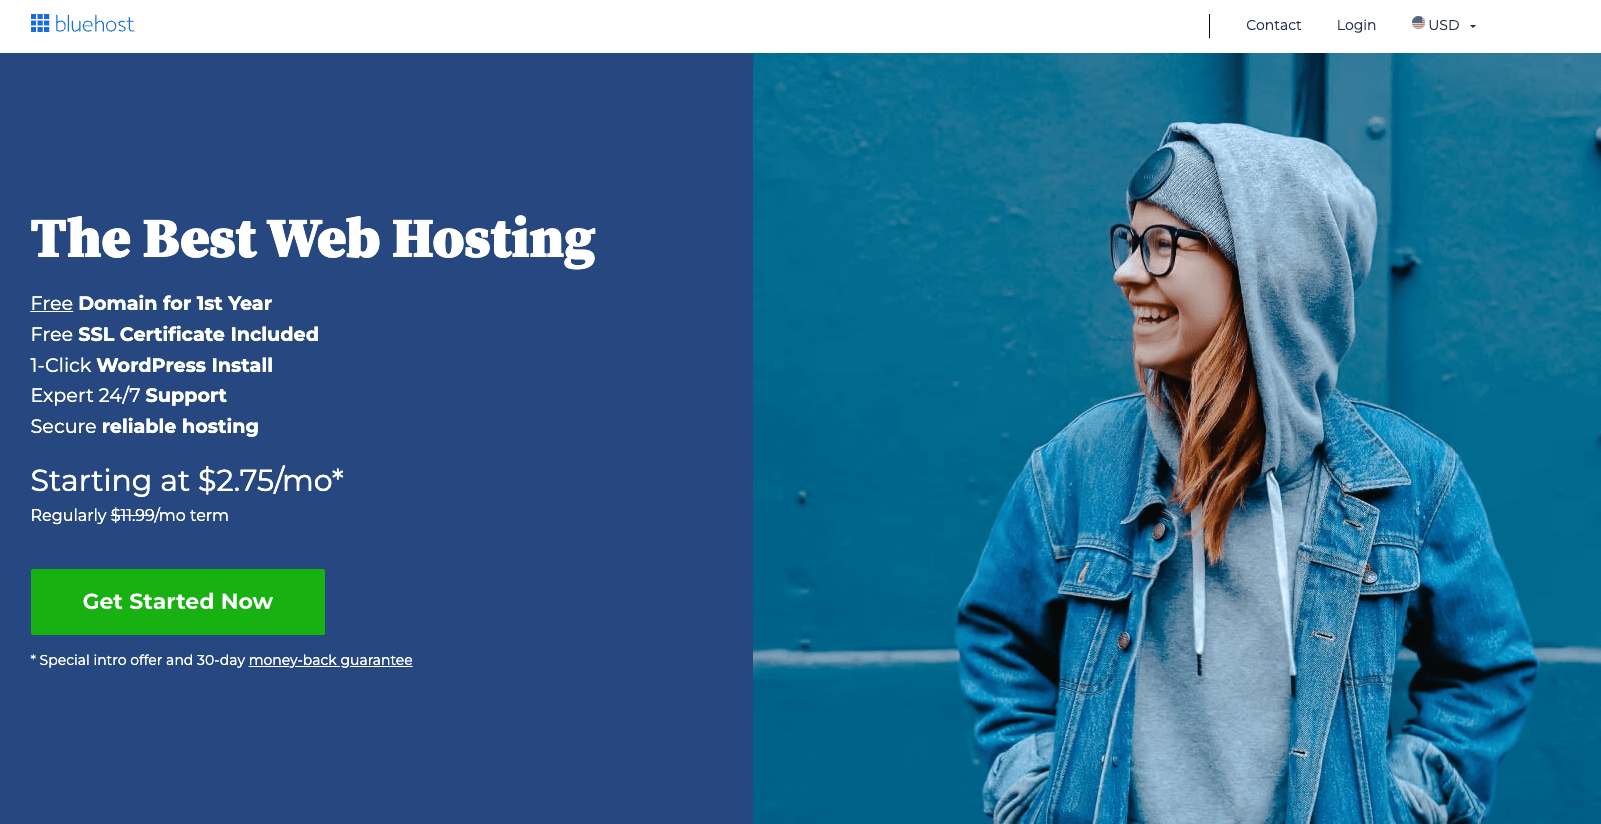 Bluehost offers cheap unlimited hosting plans.